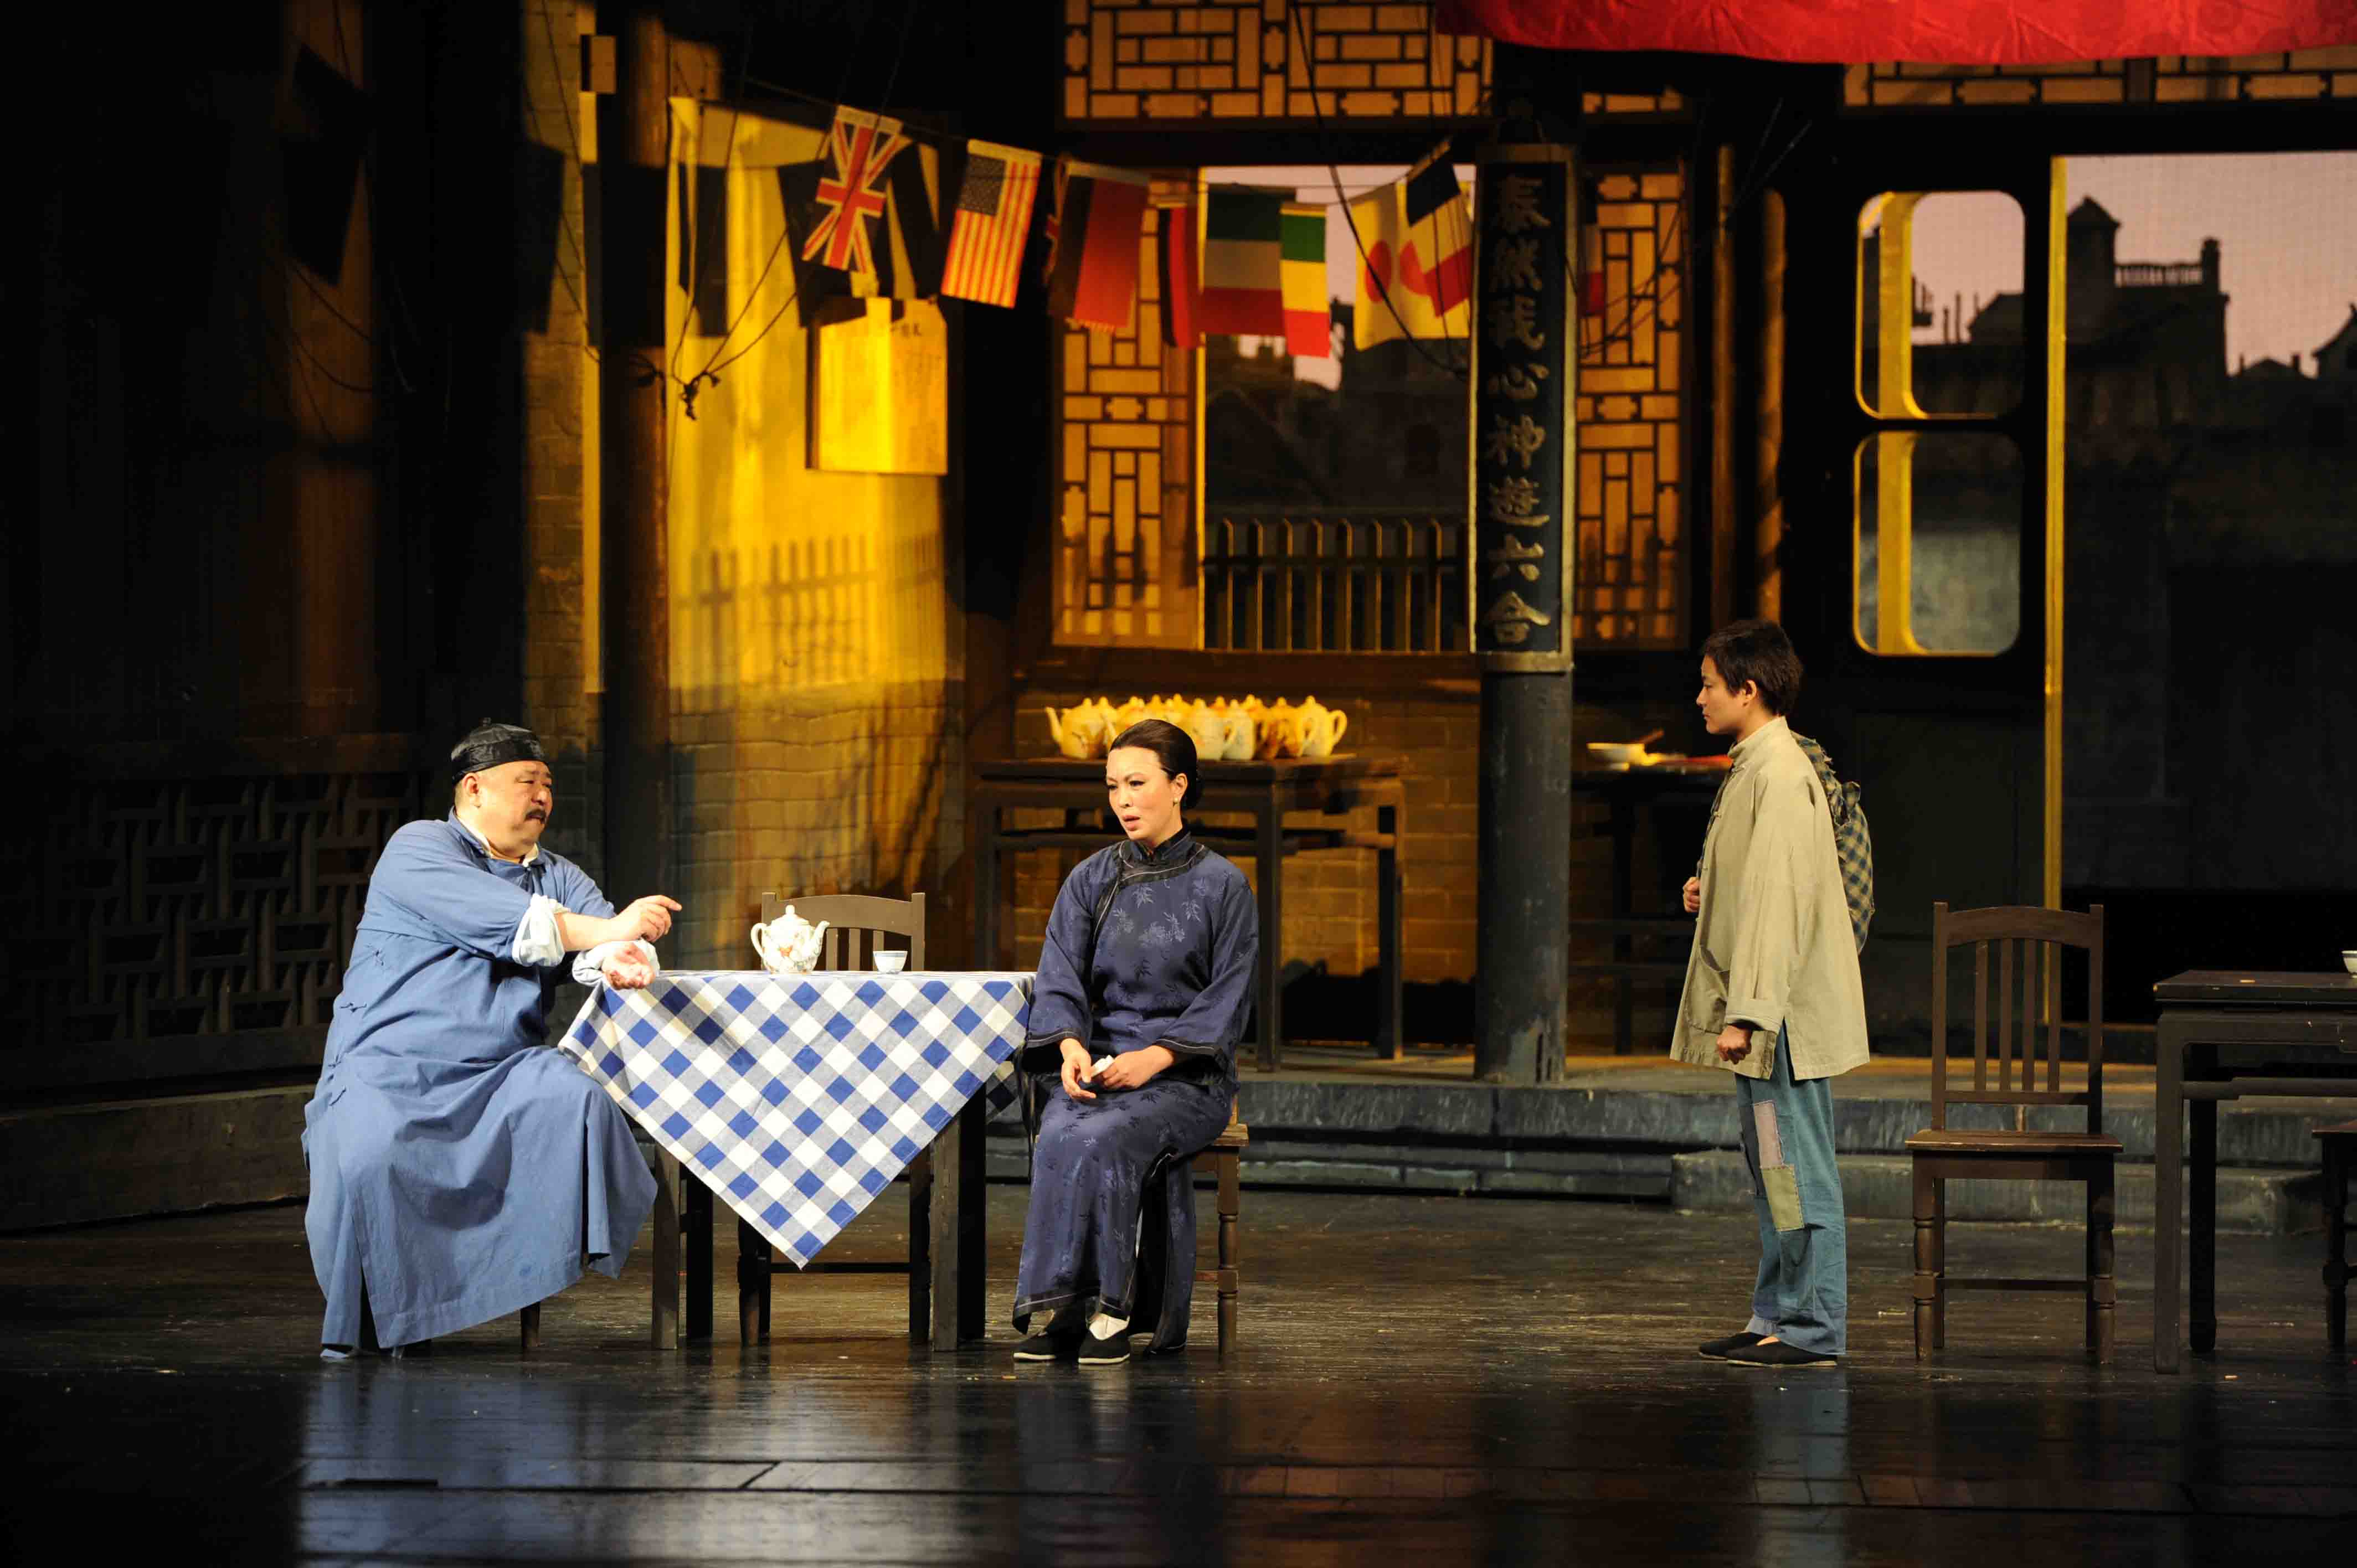 Act II of Teahouse by Lao She. Photo © Beijing People’s Art Theatre.